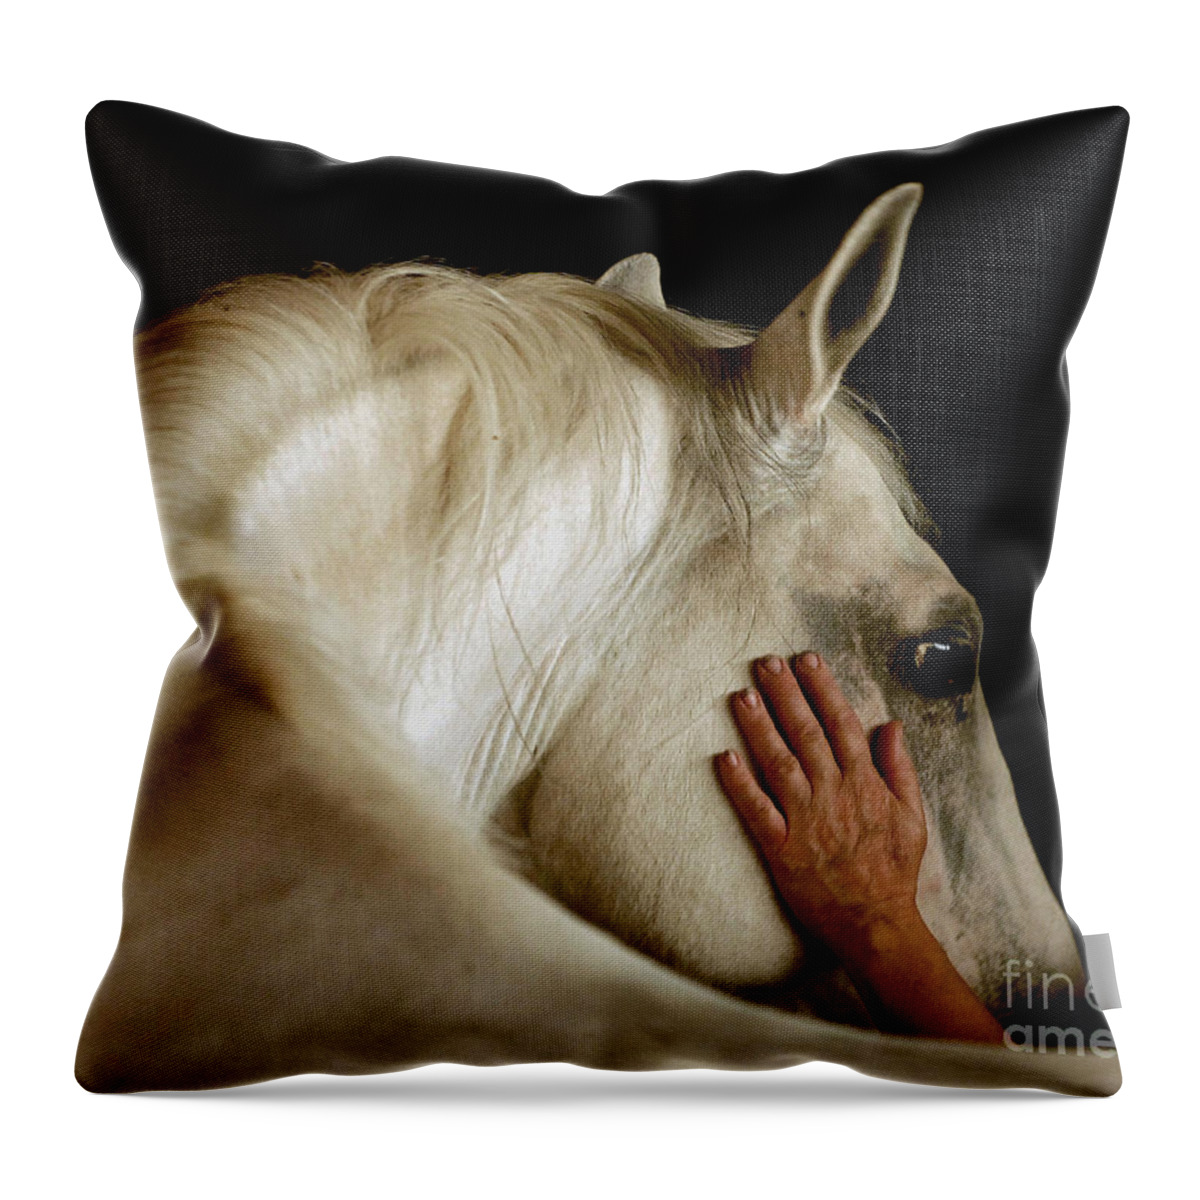 Lipizzan Throw Pillow featuring the photograph The Touch by Carien Schippers